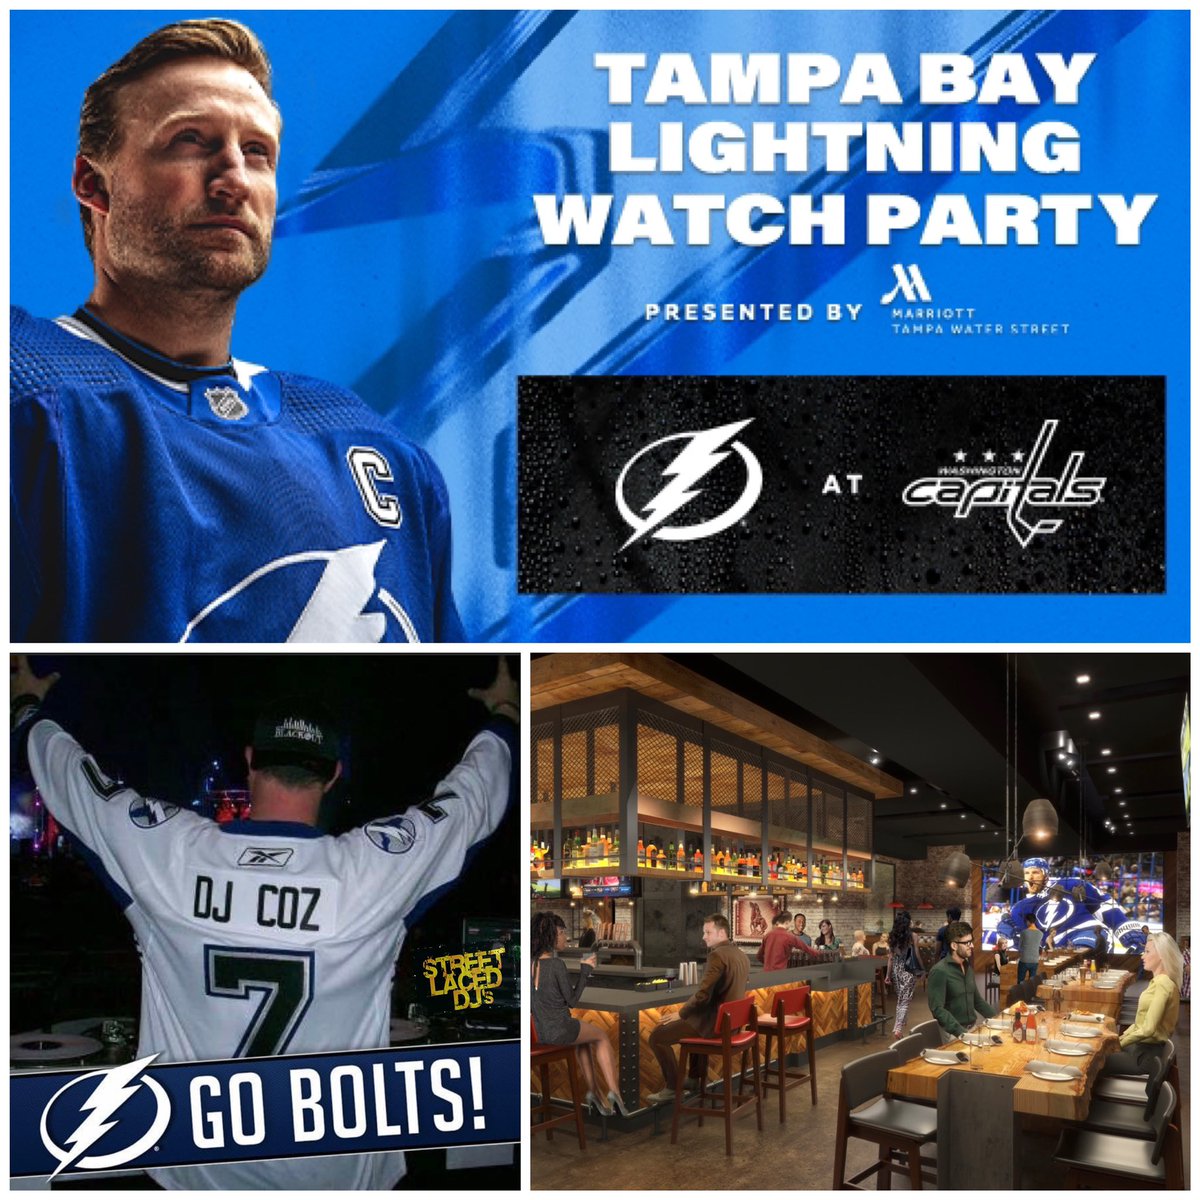 #BoltsNation! We hope to see u tomorrow at Garrison Tavern at @Marriott @WaterStTampa for the OFFICIAL @TBLightning Watch Party! We’ve got @djcoz941 in the mix, @ThunderBugTBL, @TBLRollingTHNDR, #BoltsBlueCrew & more! 20% off food & bev for Military & Vets! @CityofTampa #GoBolts